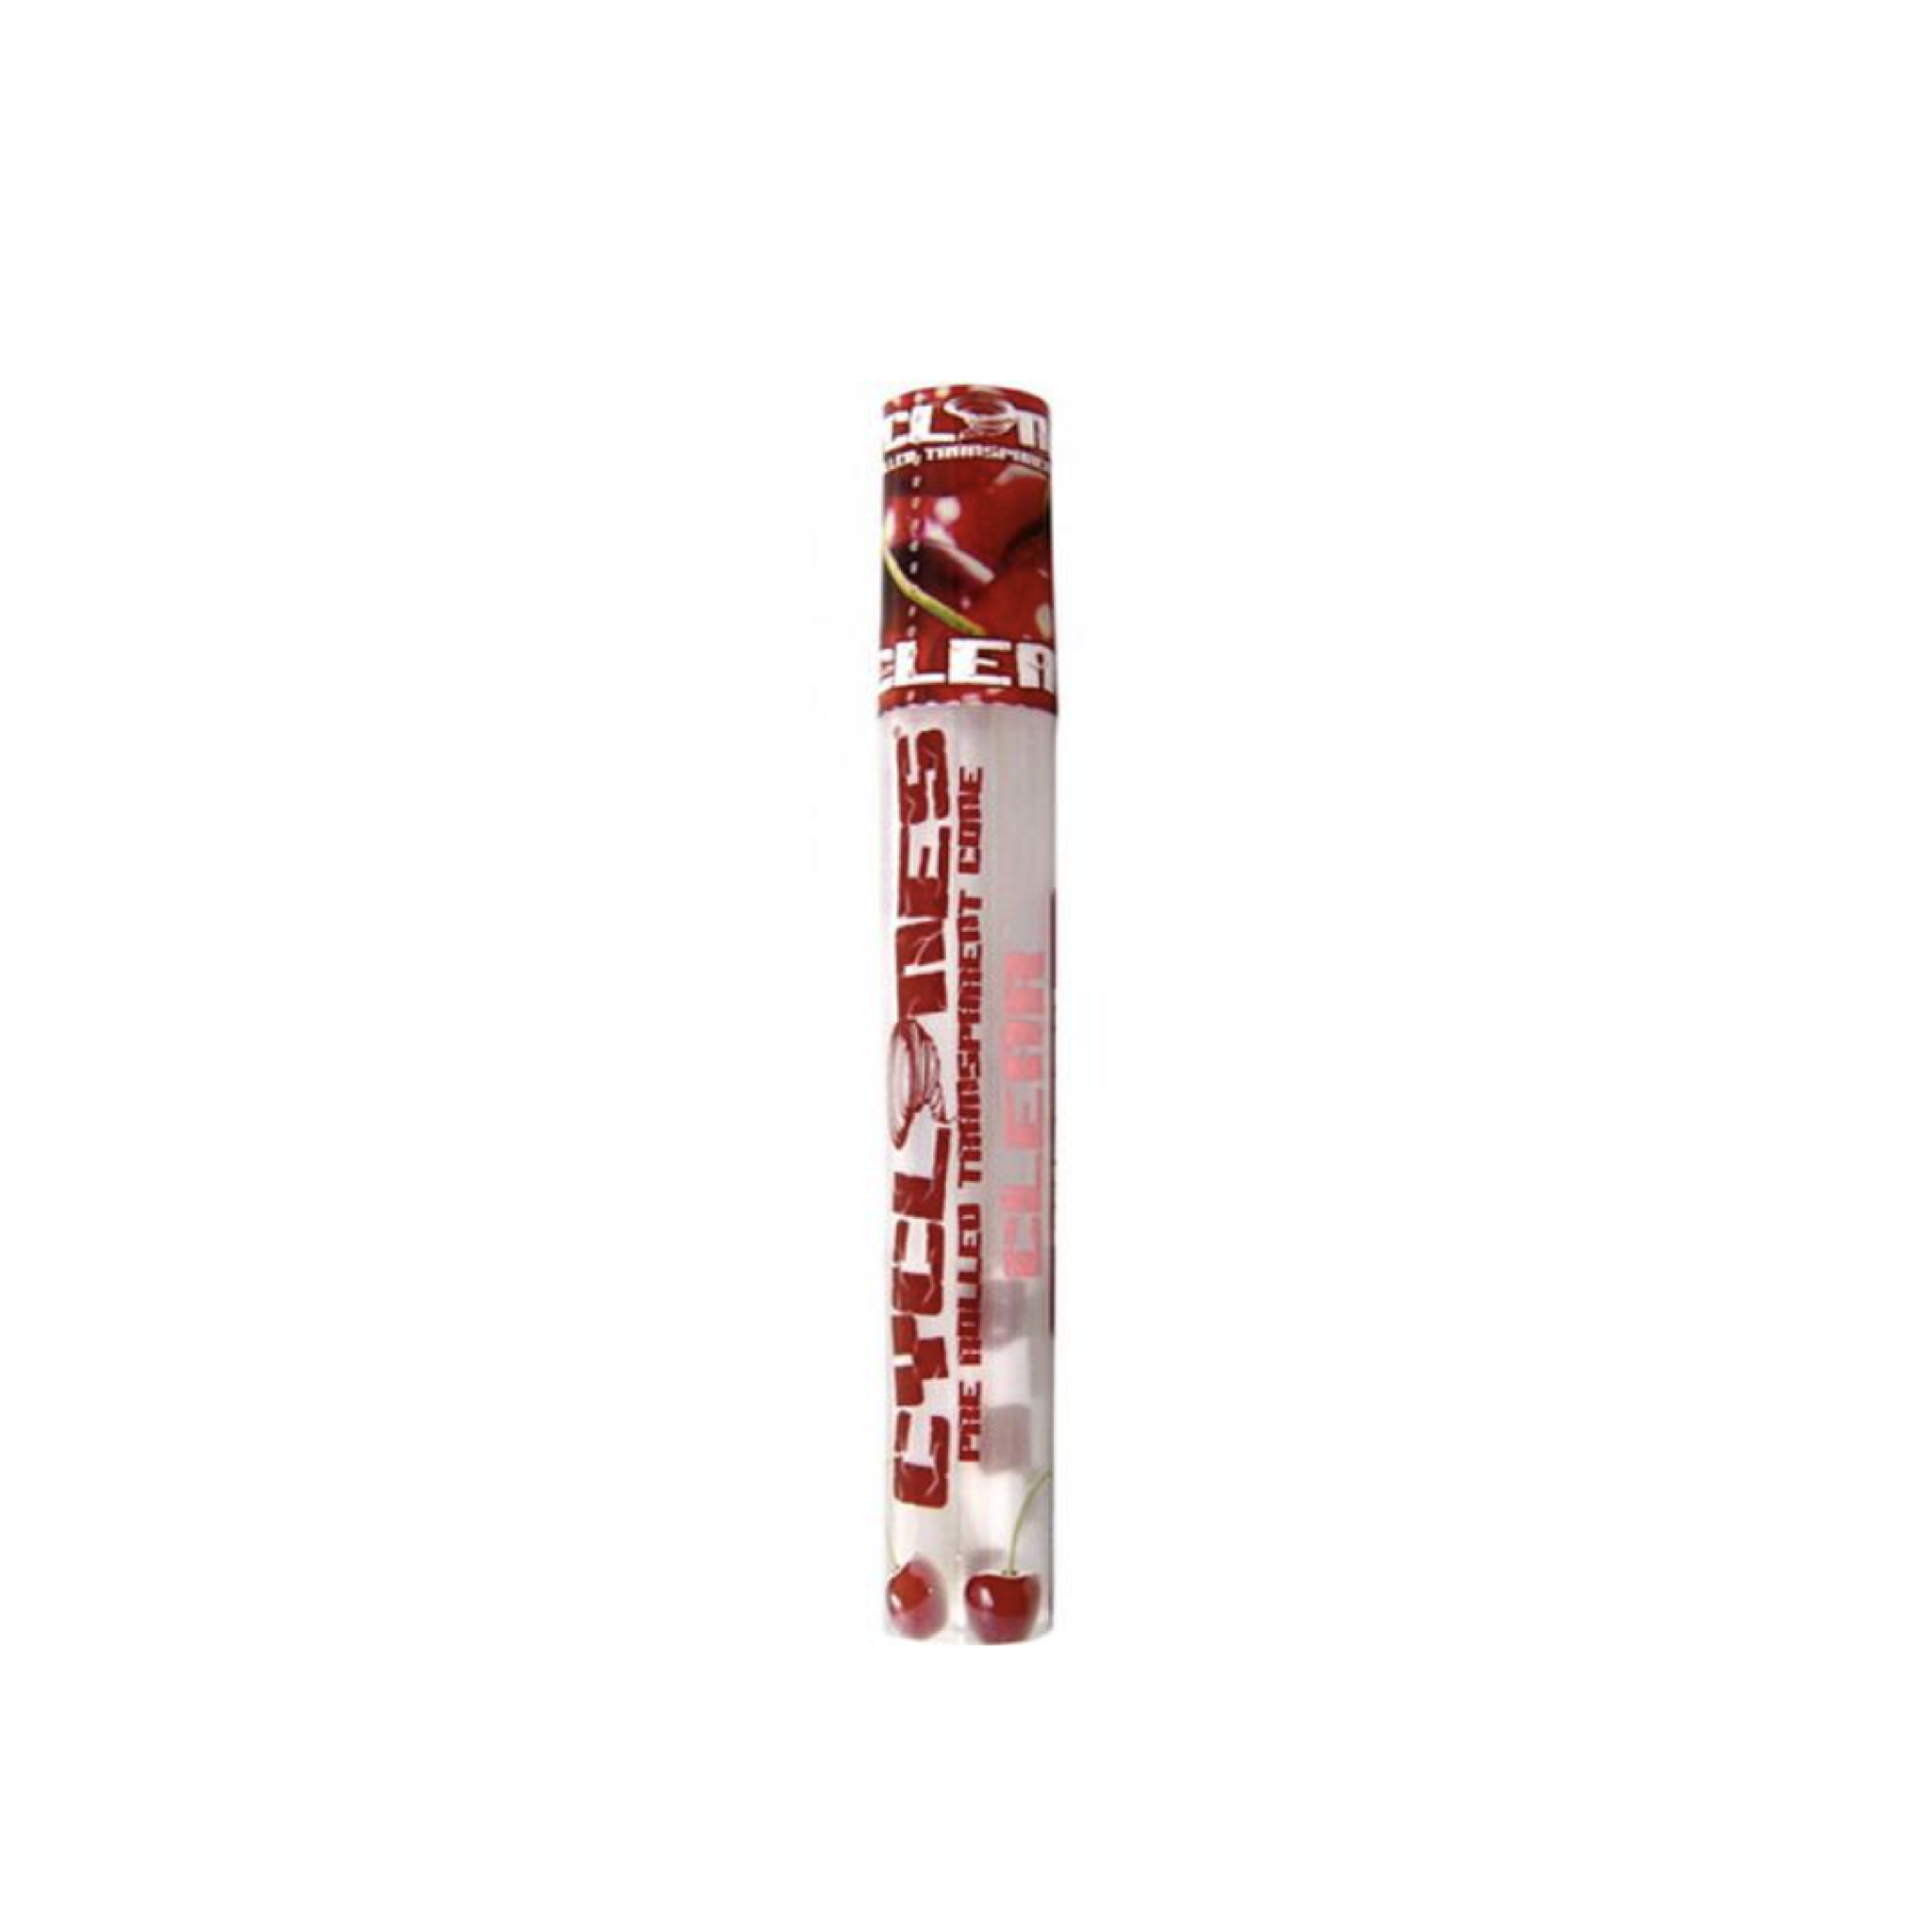 Cyclones clear cherry cone available on Jonnybaba lifestyle 